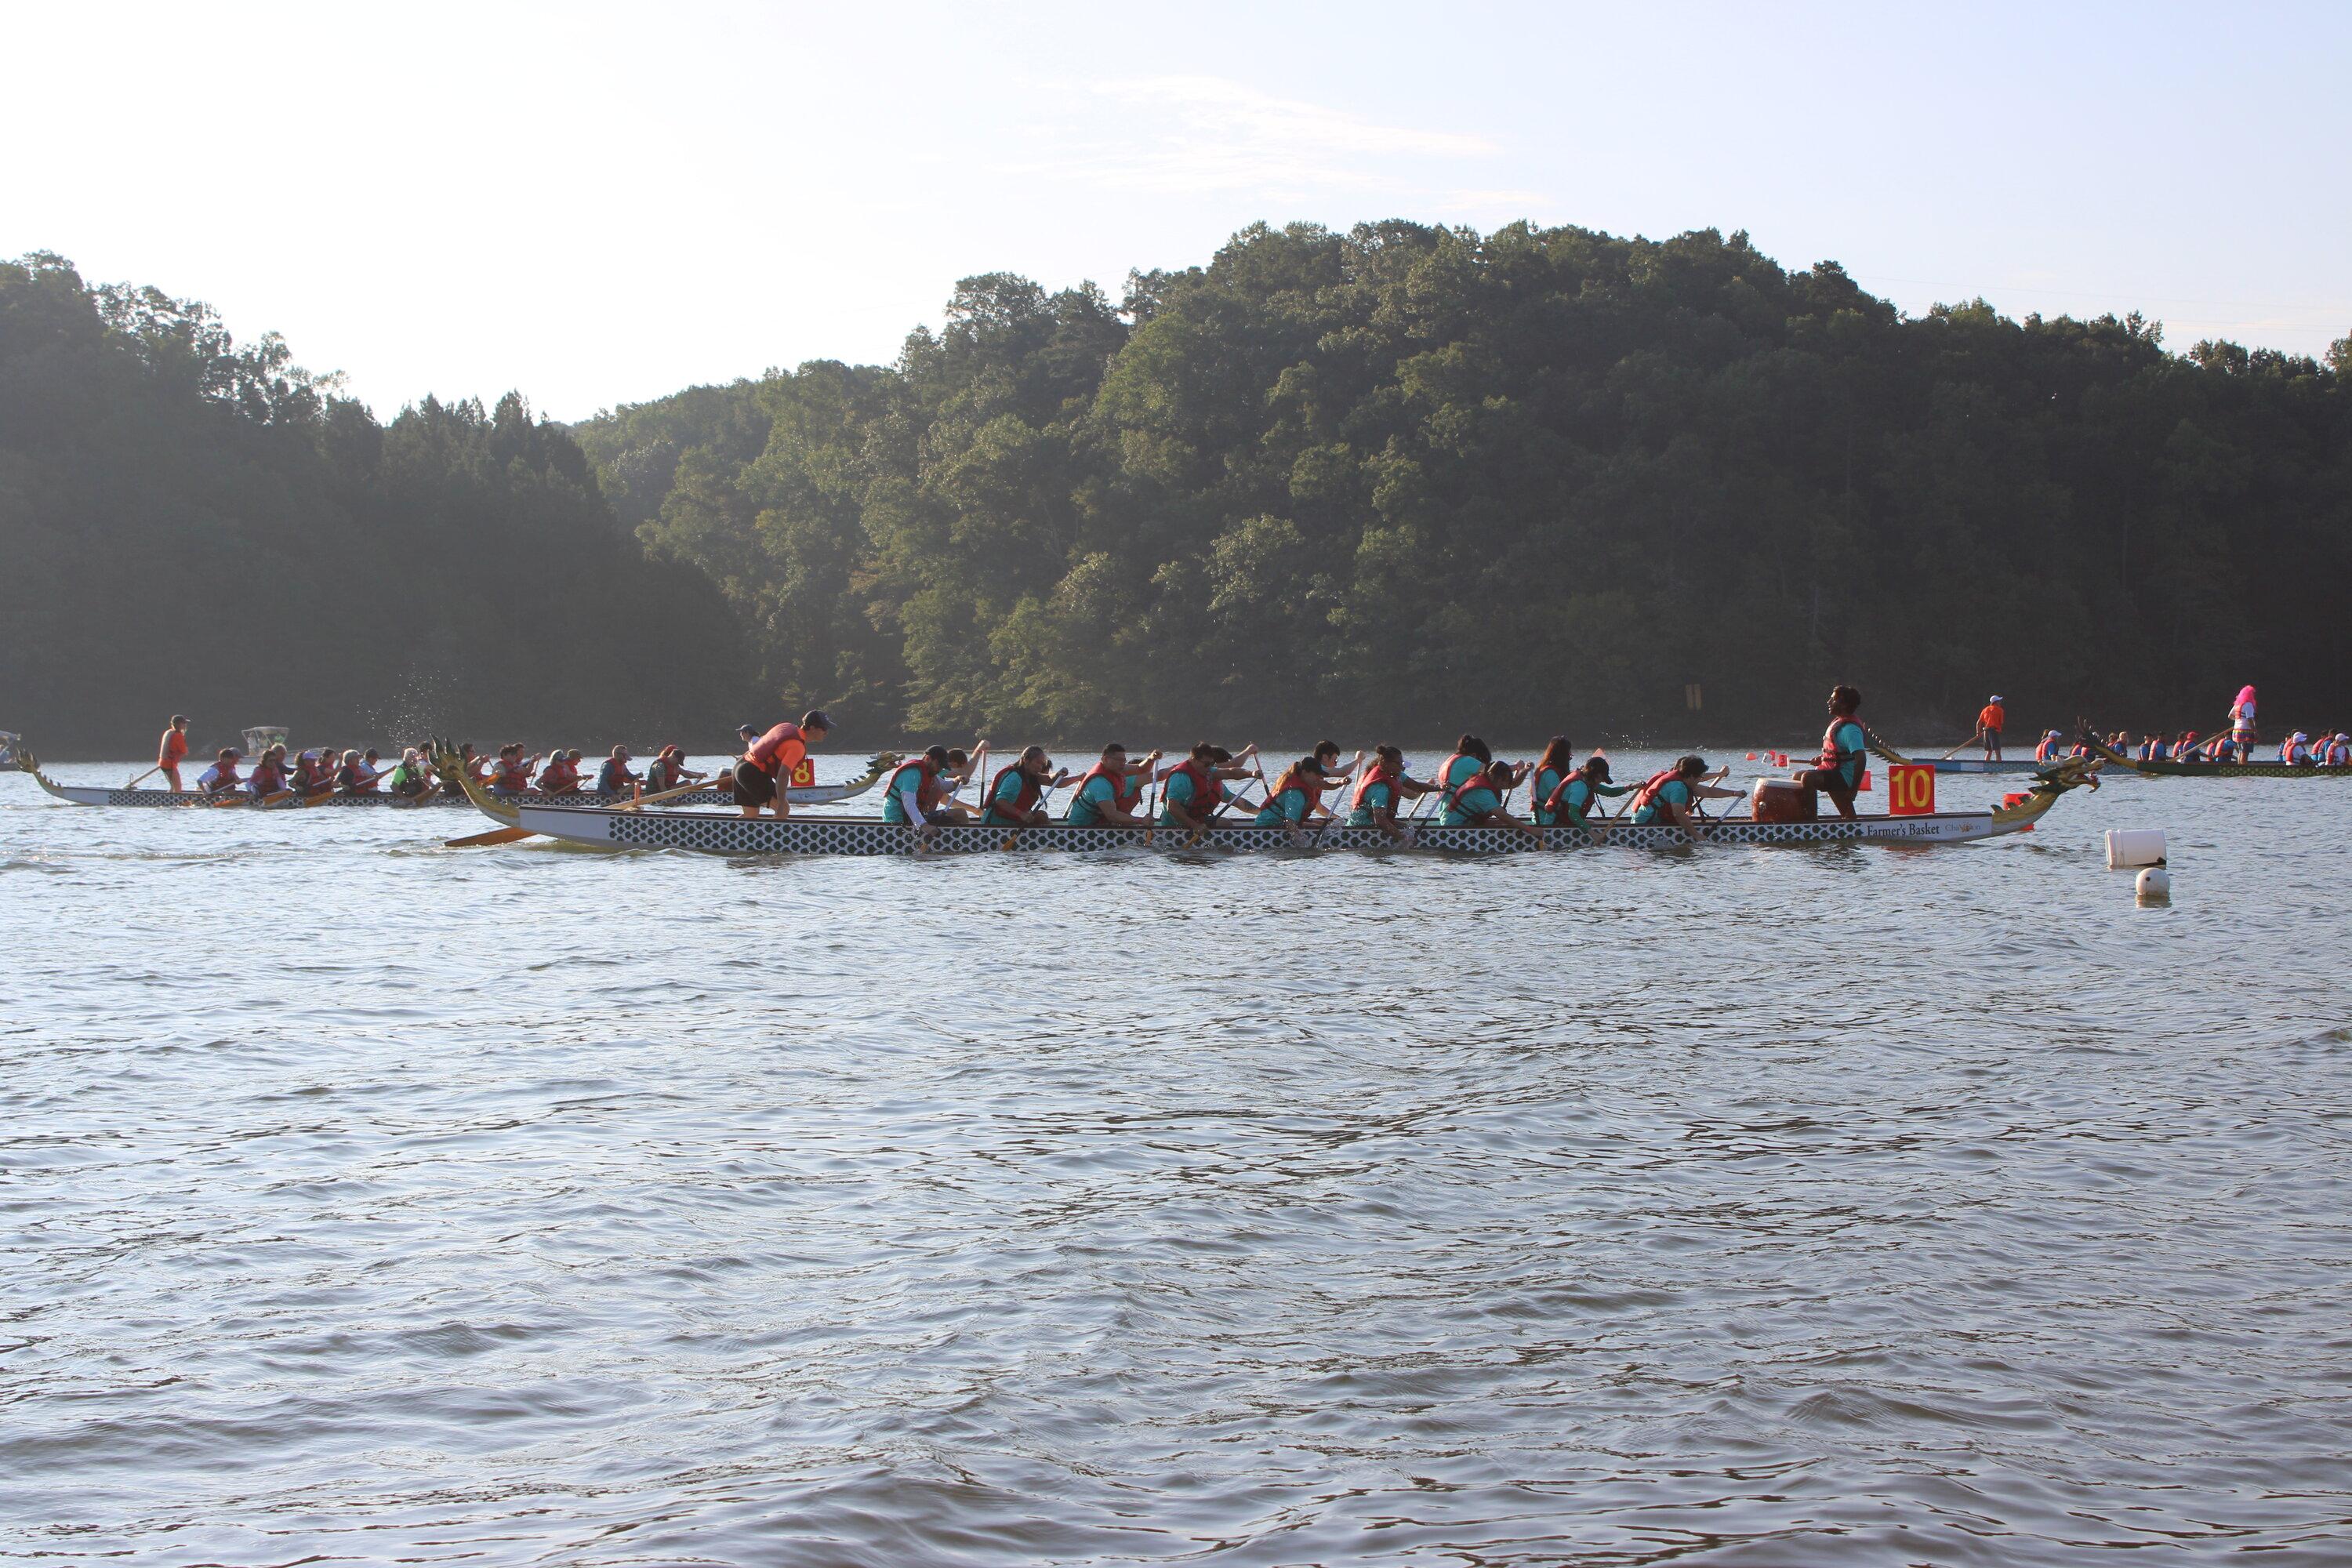 Supported by the Hong Kong Economic and Trade Office in New York, the Atlanta
Hong Kong Dragon Boat Festival was held at the Lake Lanier Olympic Park on September 9 (Atlanta time), with 64 teams from Florida, Georgia, North Carolina, South Carolina and Tennessee participating.